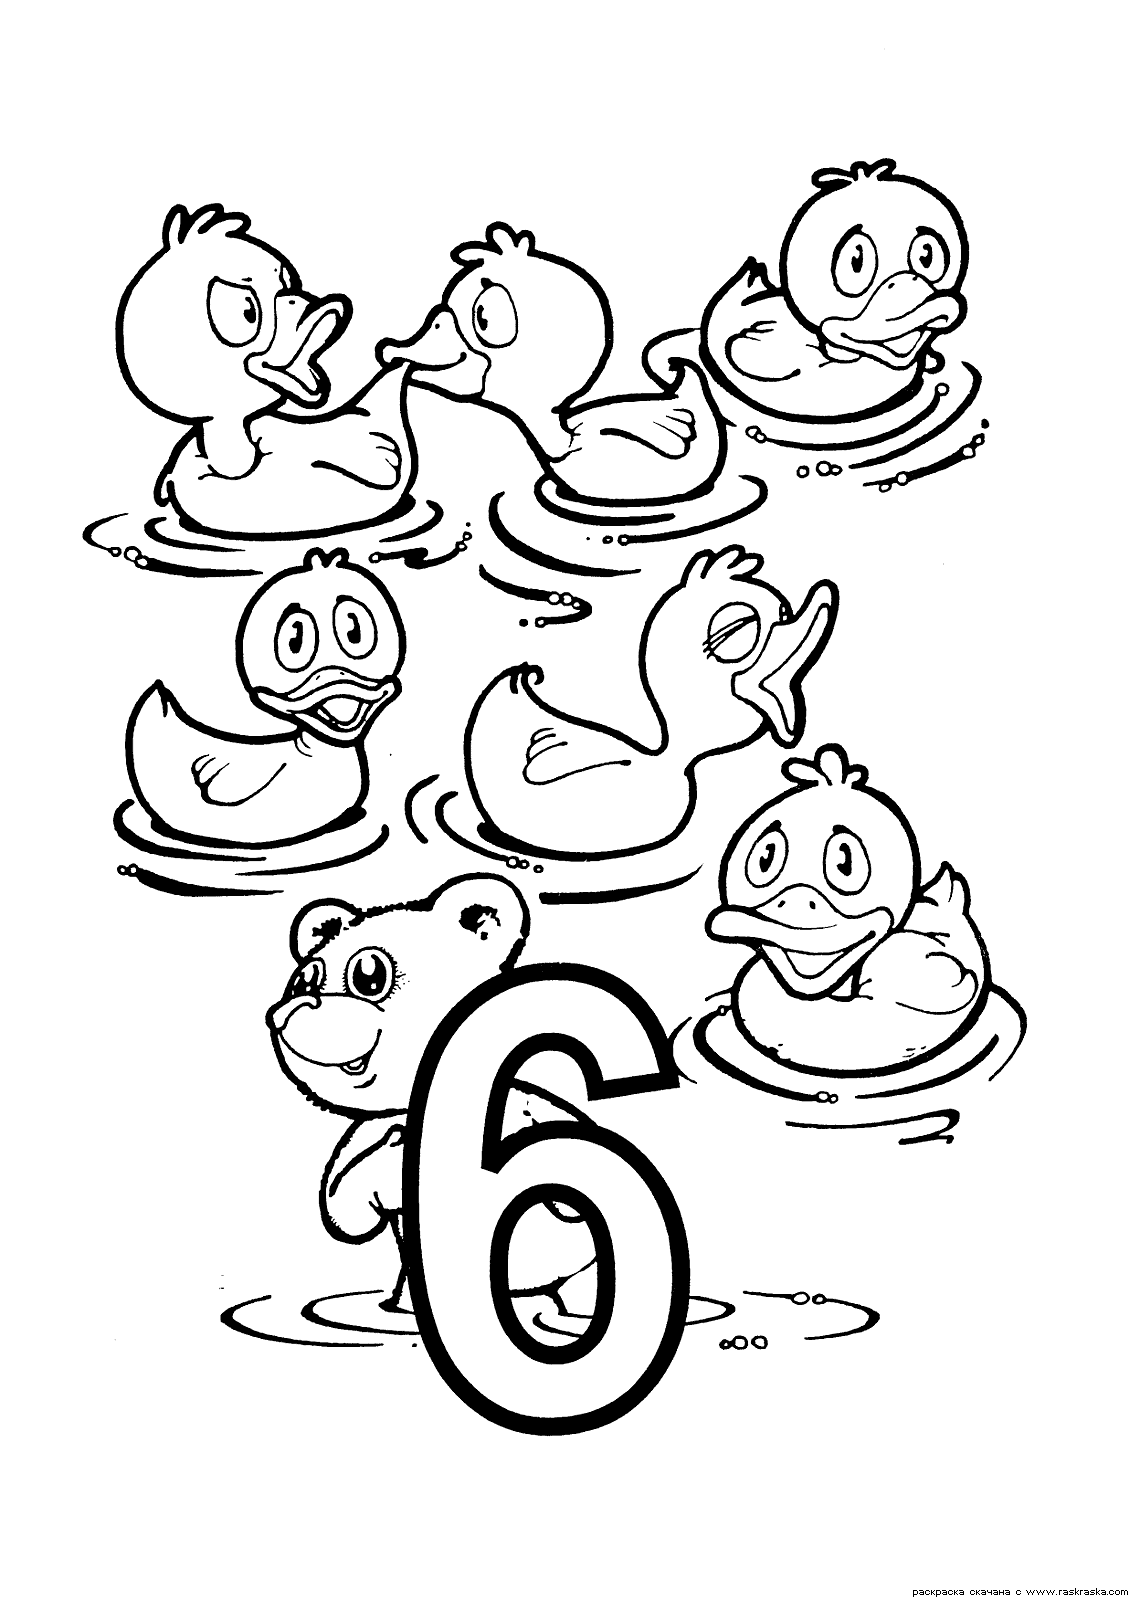 Coloring Page With Numbers